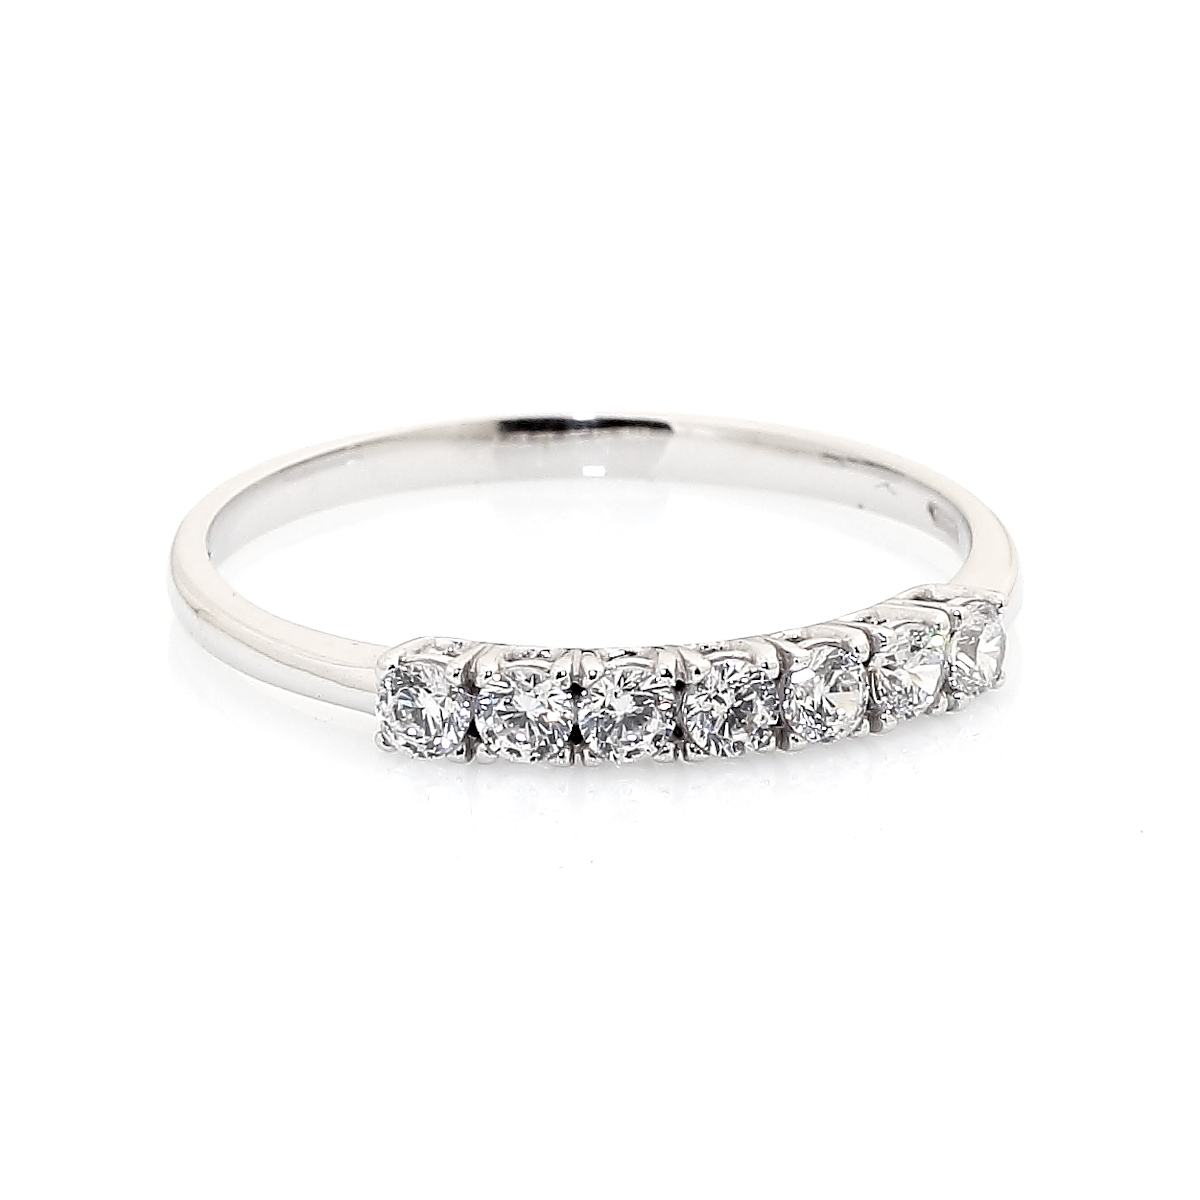 750 Mill. White Gold Ring with Cubic Zirconia Size N-3/4